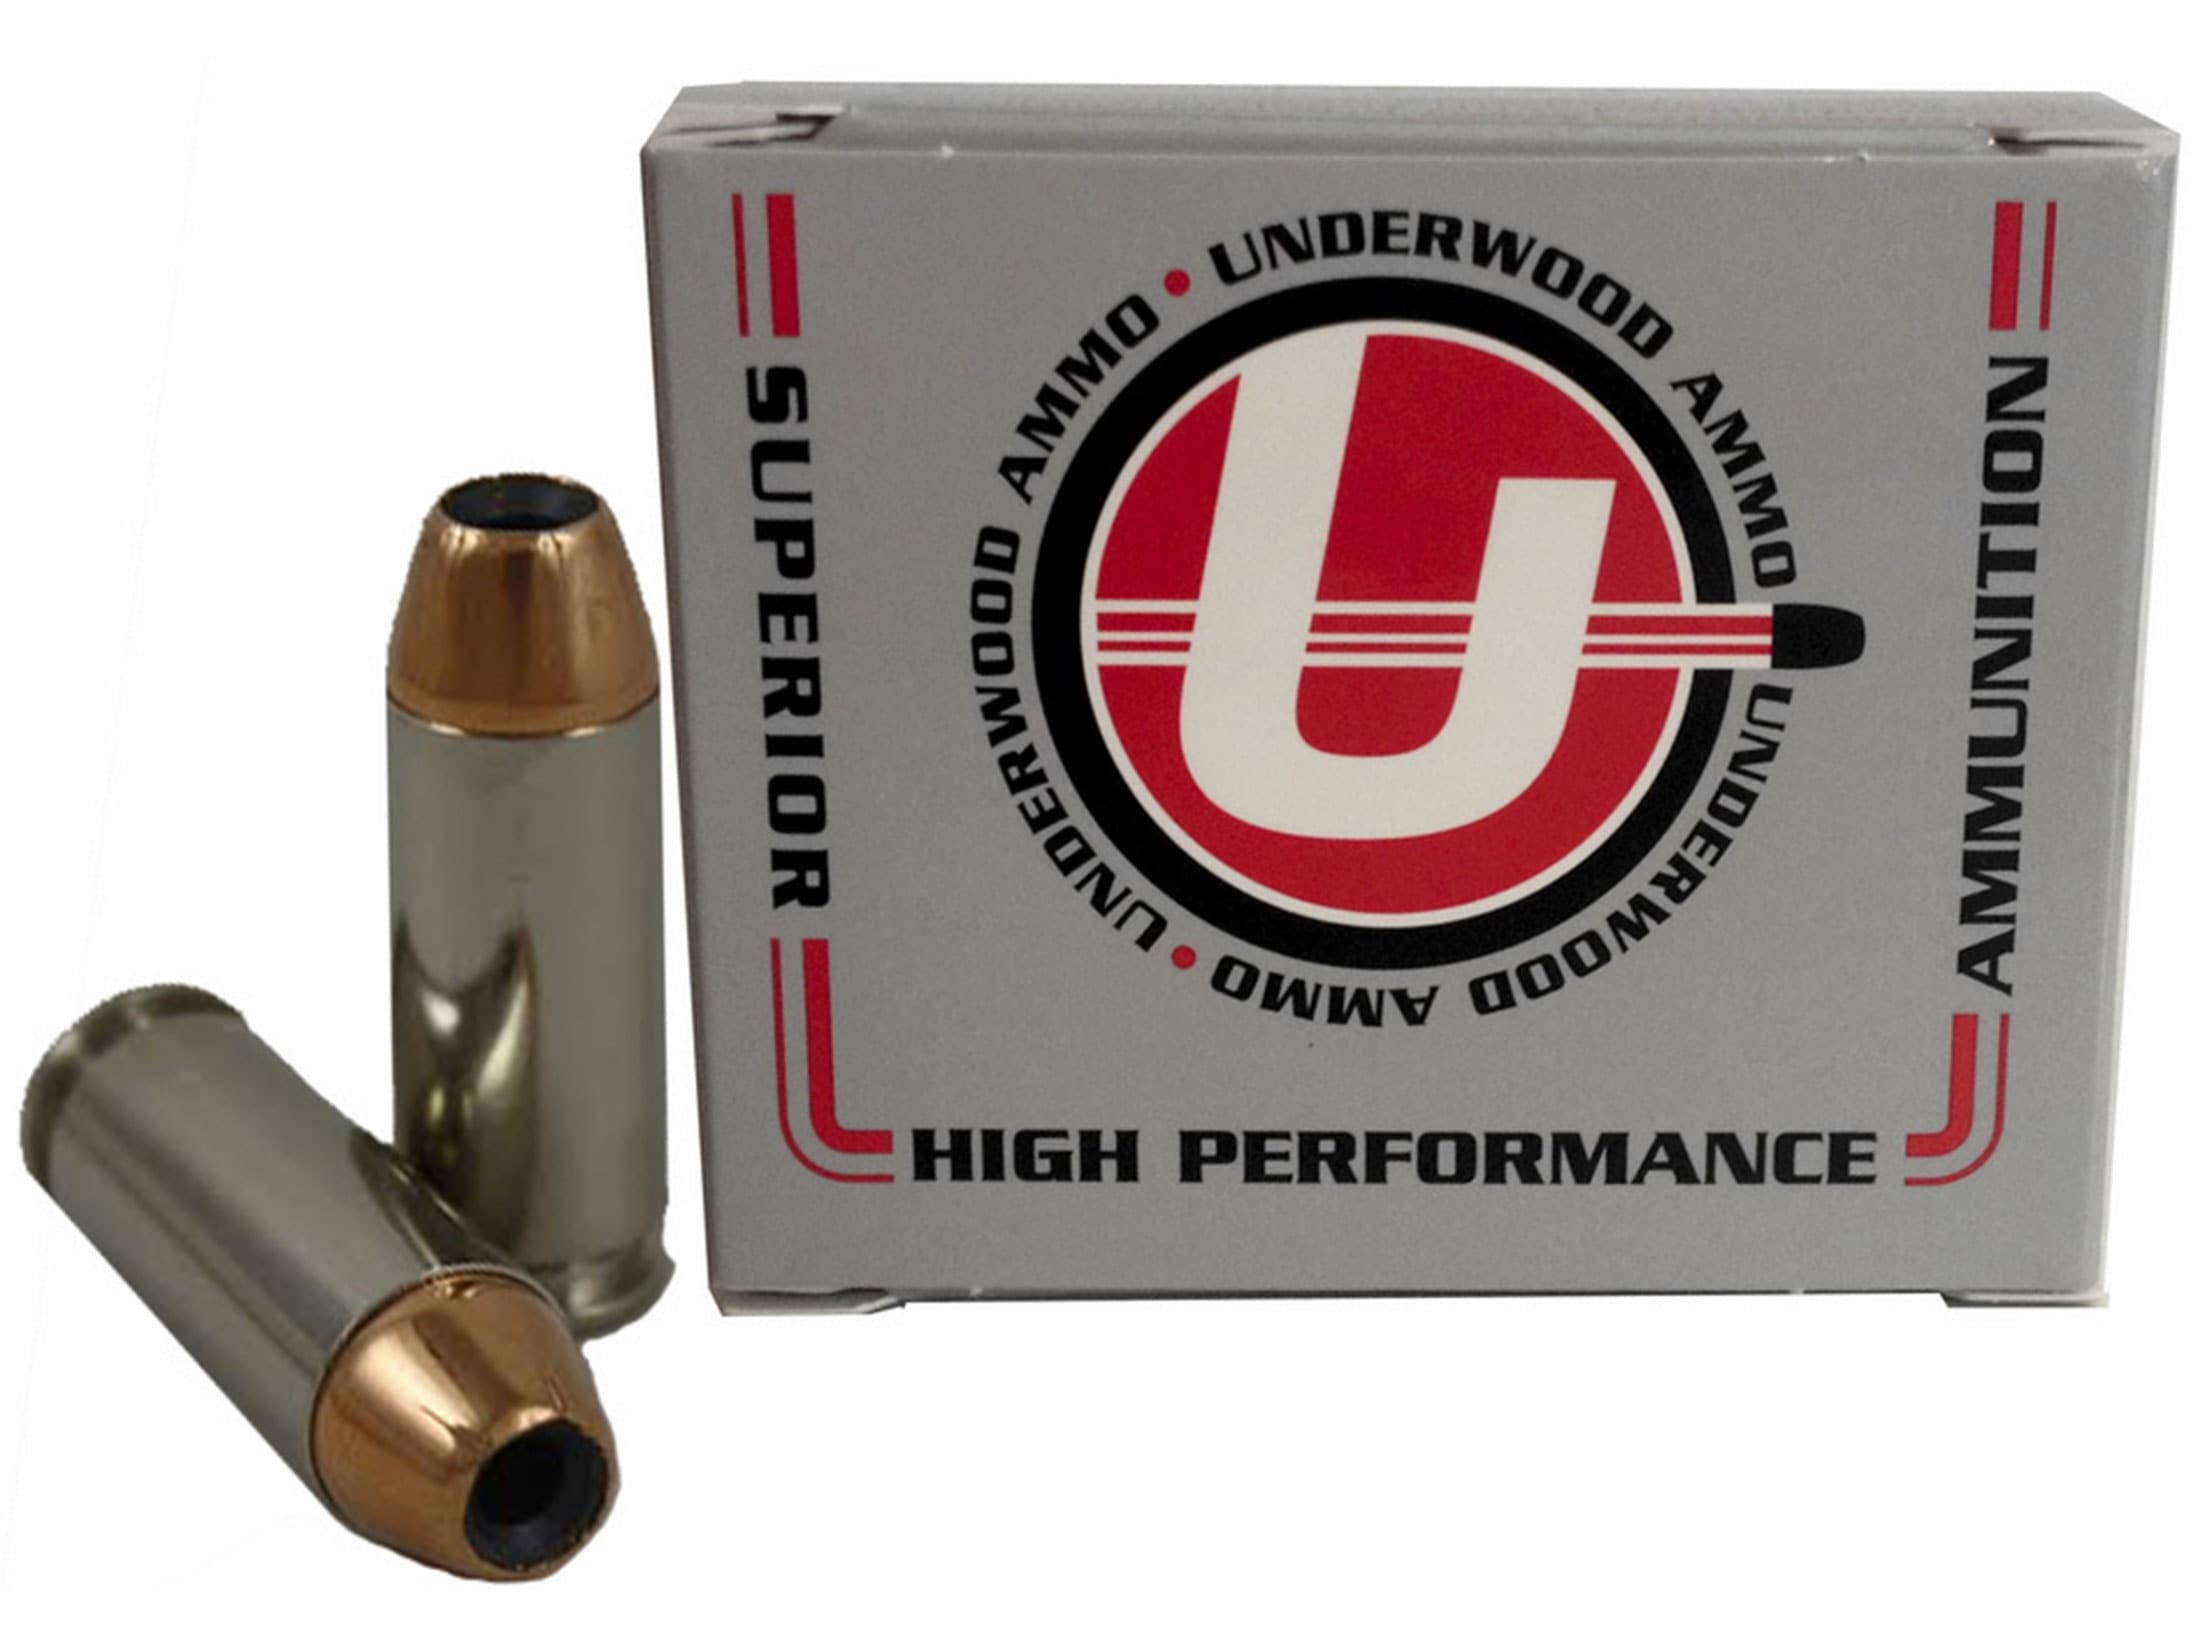 Underwood Ammunition 10mm Auto 180 Grain Jacketed Hollow Point Box of 20